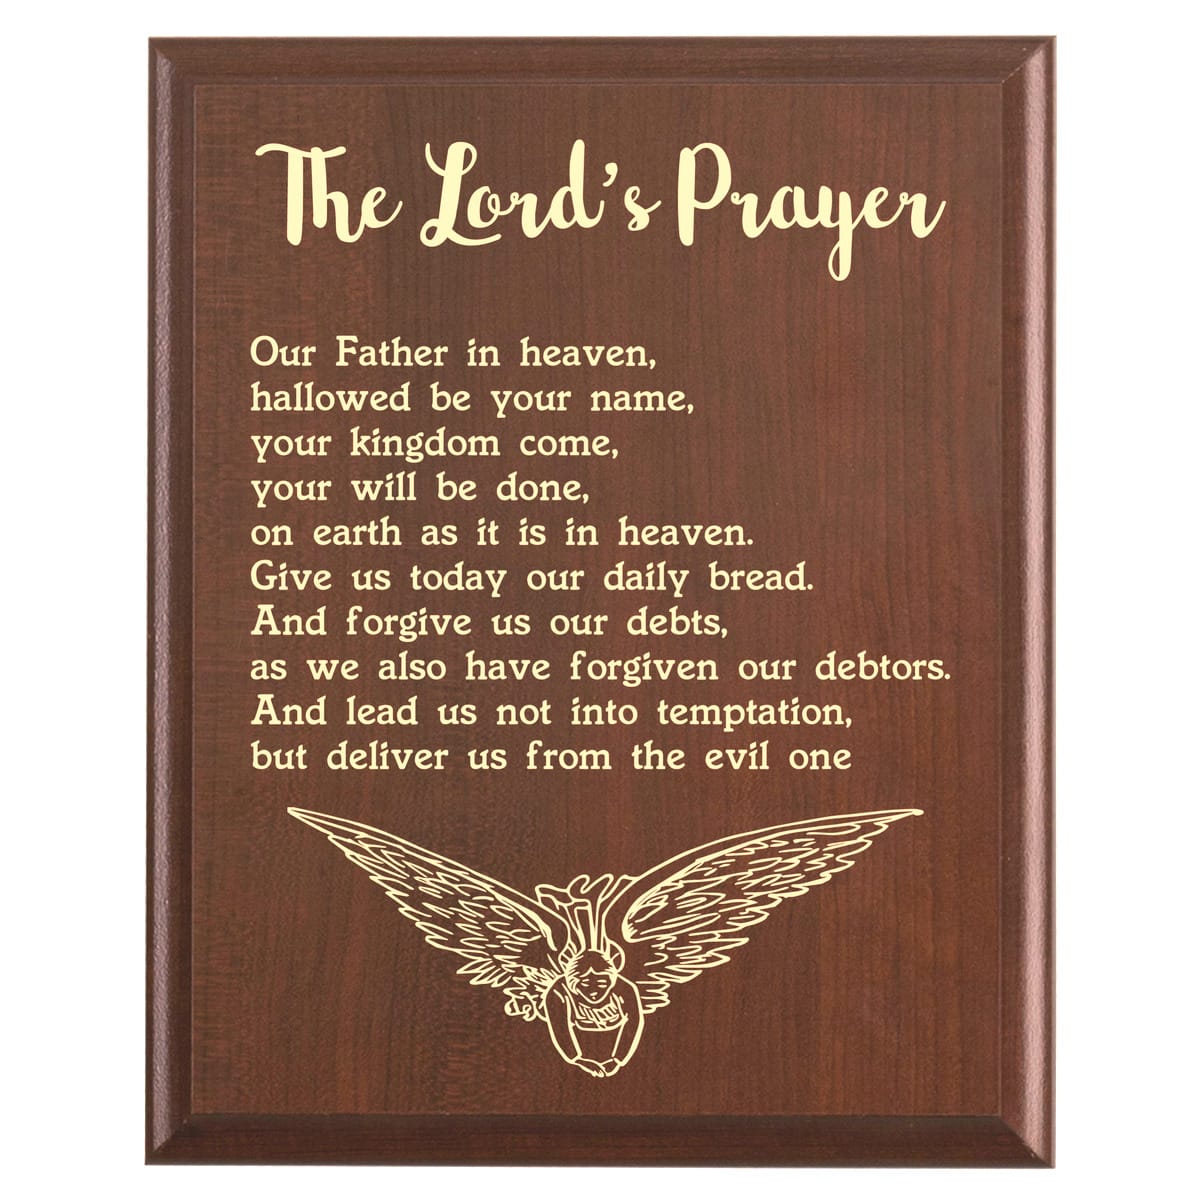 Plaque photo: Lord's Prayer Plaque NIV design with free personalization. Wood style finish with customized text.